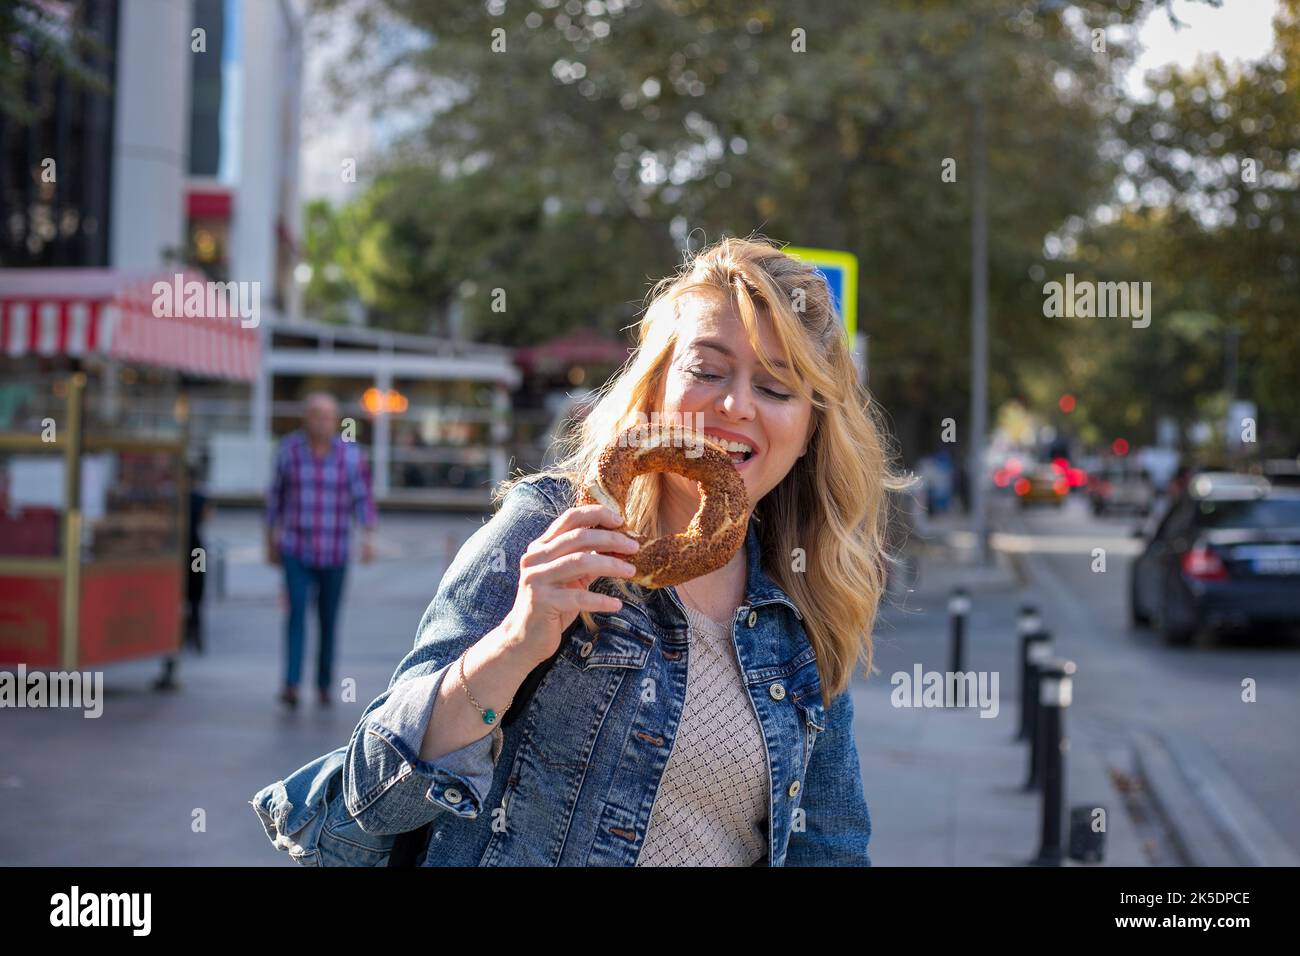 Blonde woman eating traditional Turkish bread bagel on the street. Stock Photo